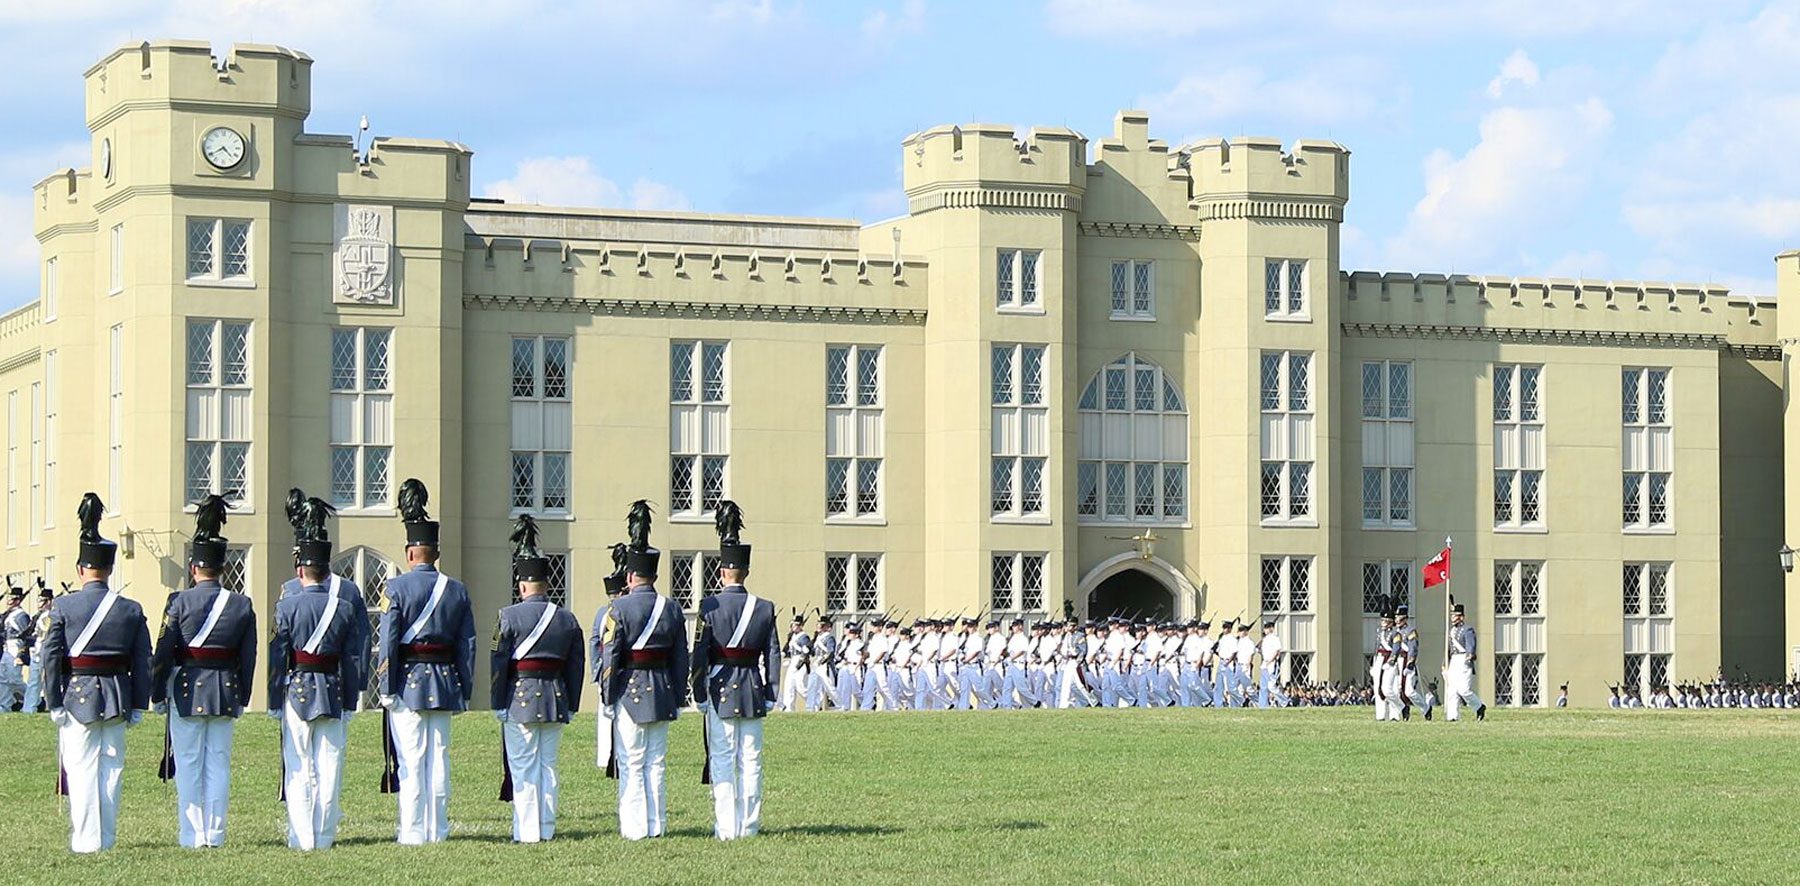 cadets on Parade Ground in front of new barracks